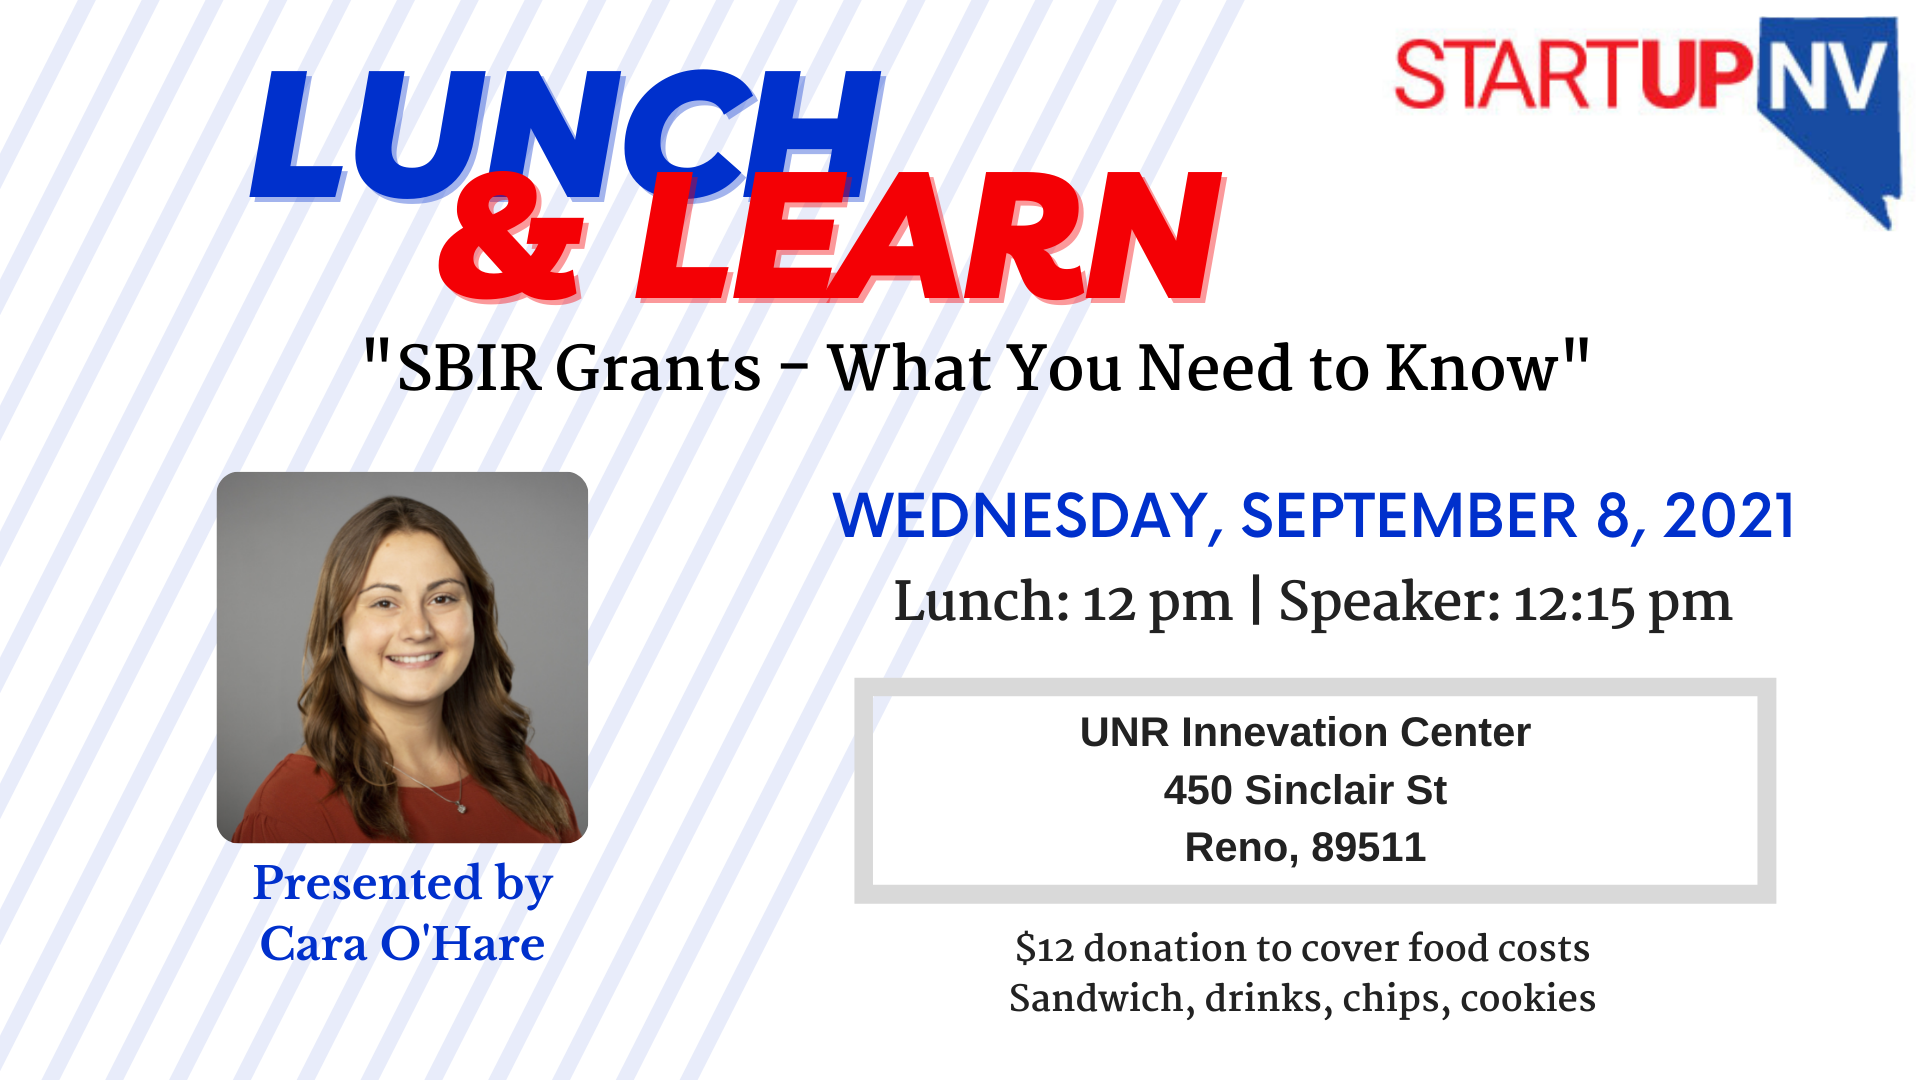 Lunch and Learn at the top of the page in blue and red. Underneath it says "SBIR Grants - What you need to know." the date is Wednesday September 8, 2021 and it is located at the University of Nevada, Reno Innevation Center at 450 Sinclair Street Reno, Nevada. There is a picture of the presenter, Cara O'Hare, on the left side of the flyer. $12 donation is requested for lunch and drinks,